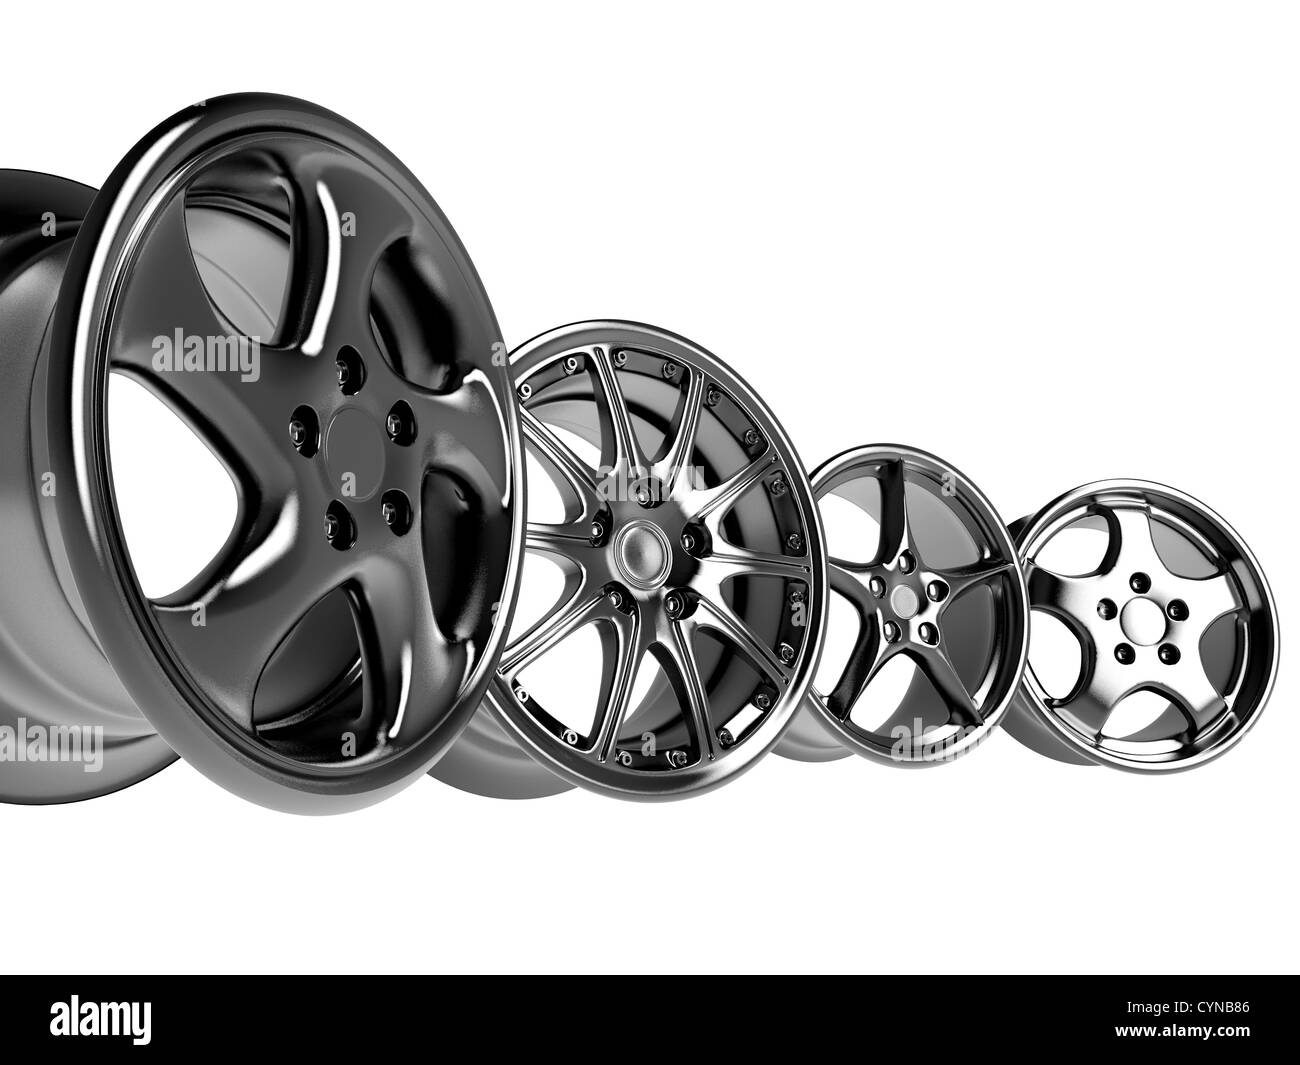 steel alloy car rims over the white background Stock Photo